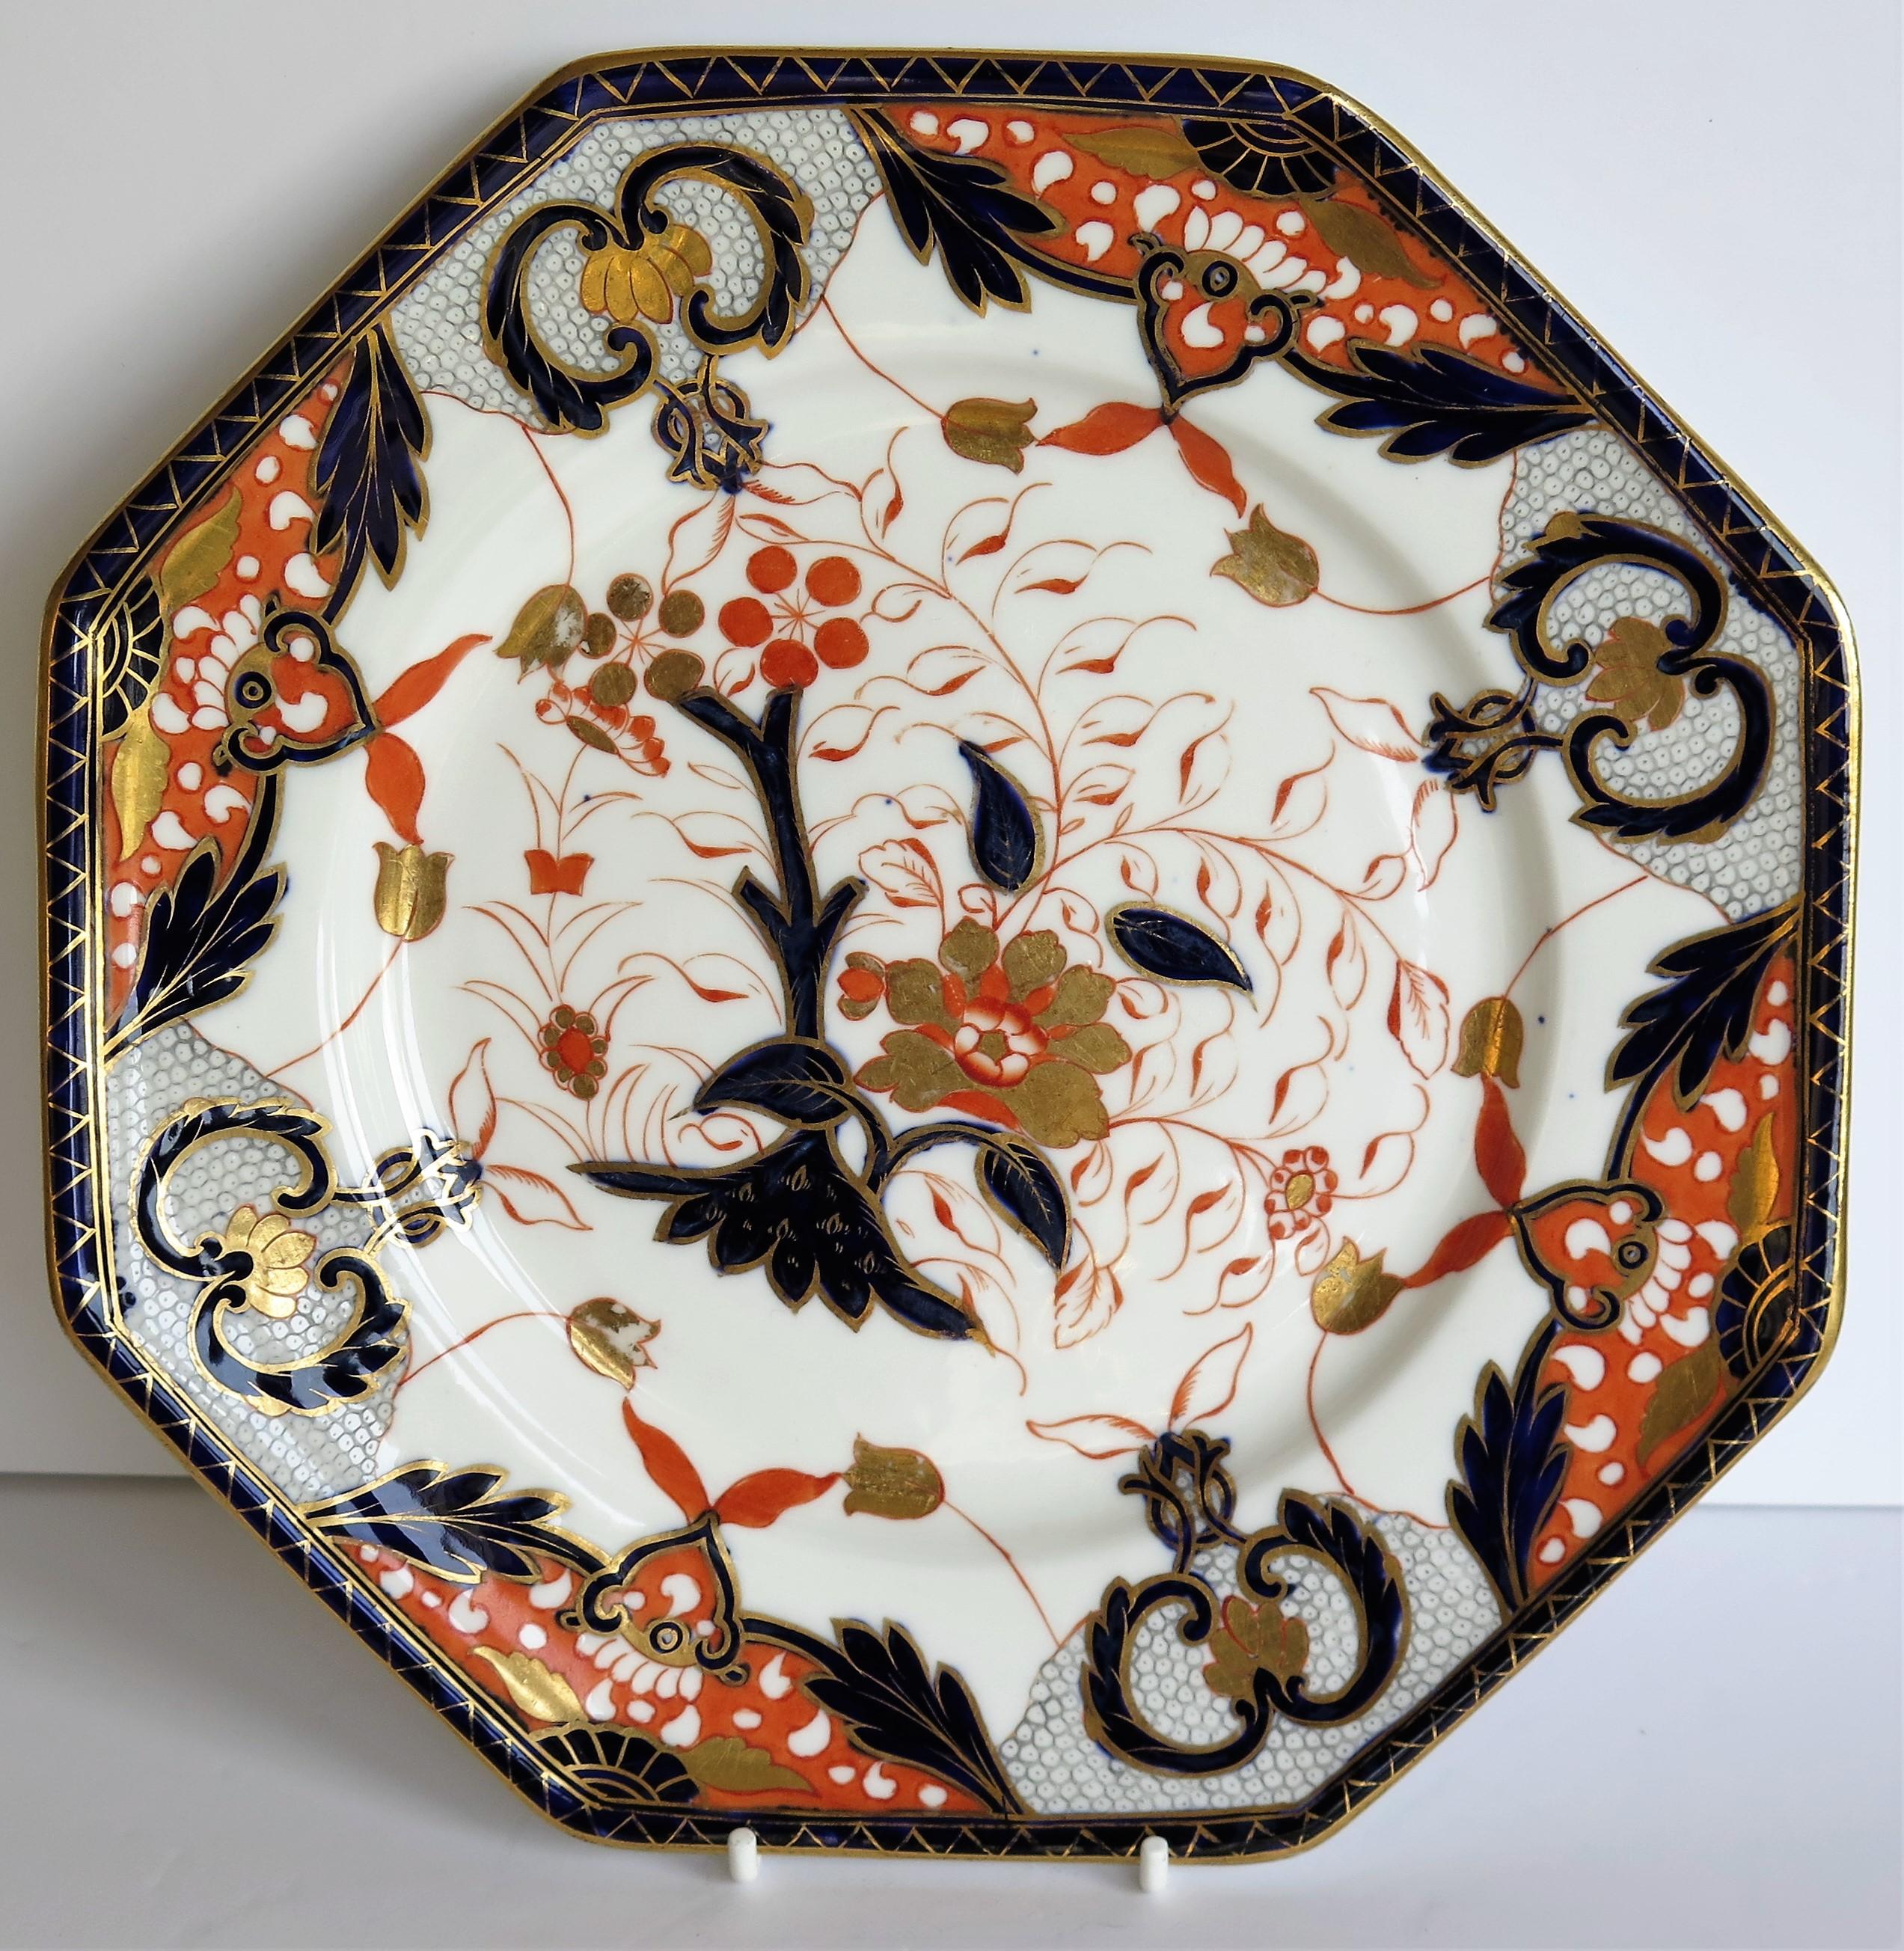 Chinoiserie Davenport Porcelain Plate Hand Painted and Gilded Pattern, England Circa 1875